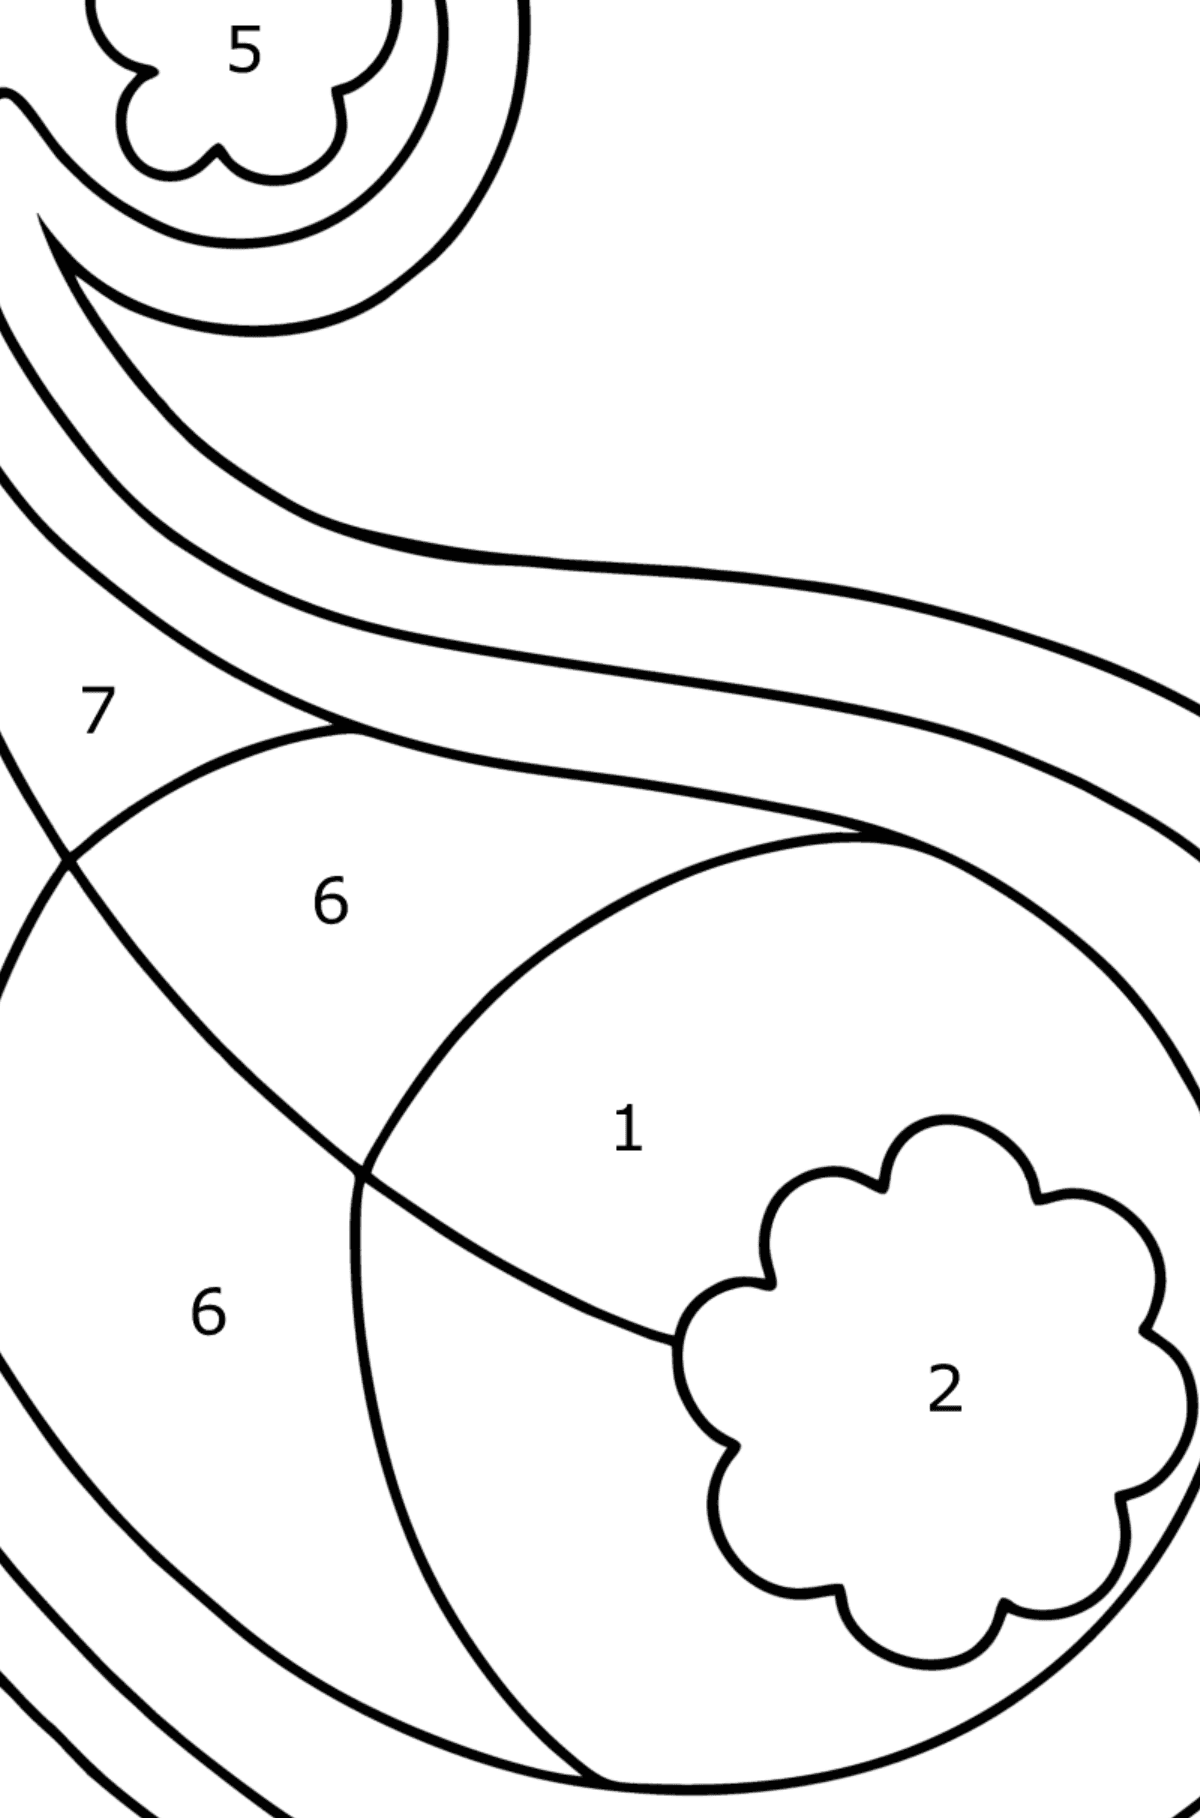 Simple Paisley coloring page - Coloring by Numbers for Kids